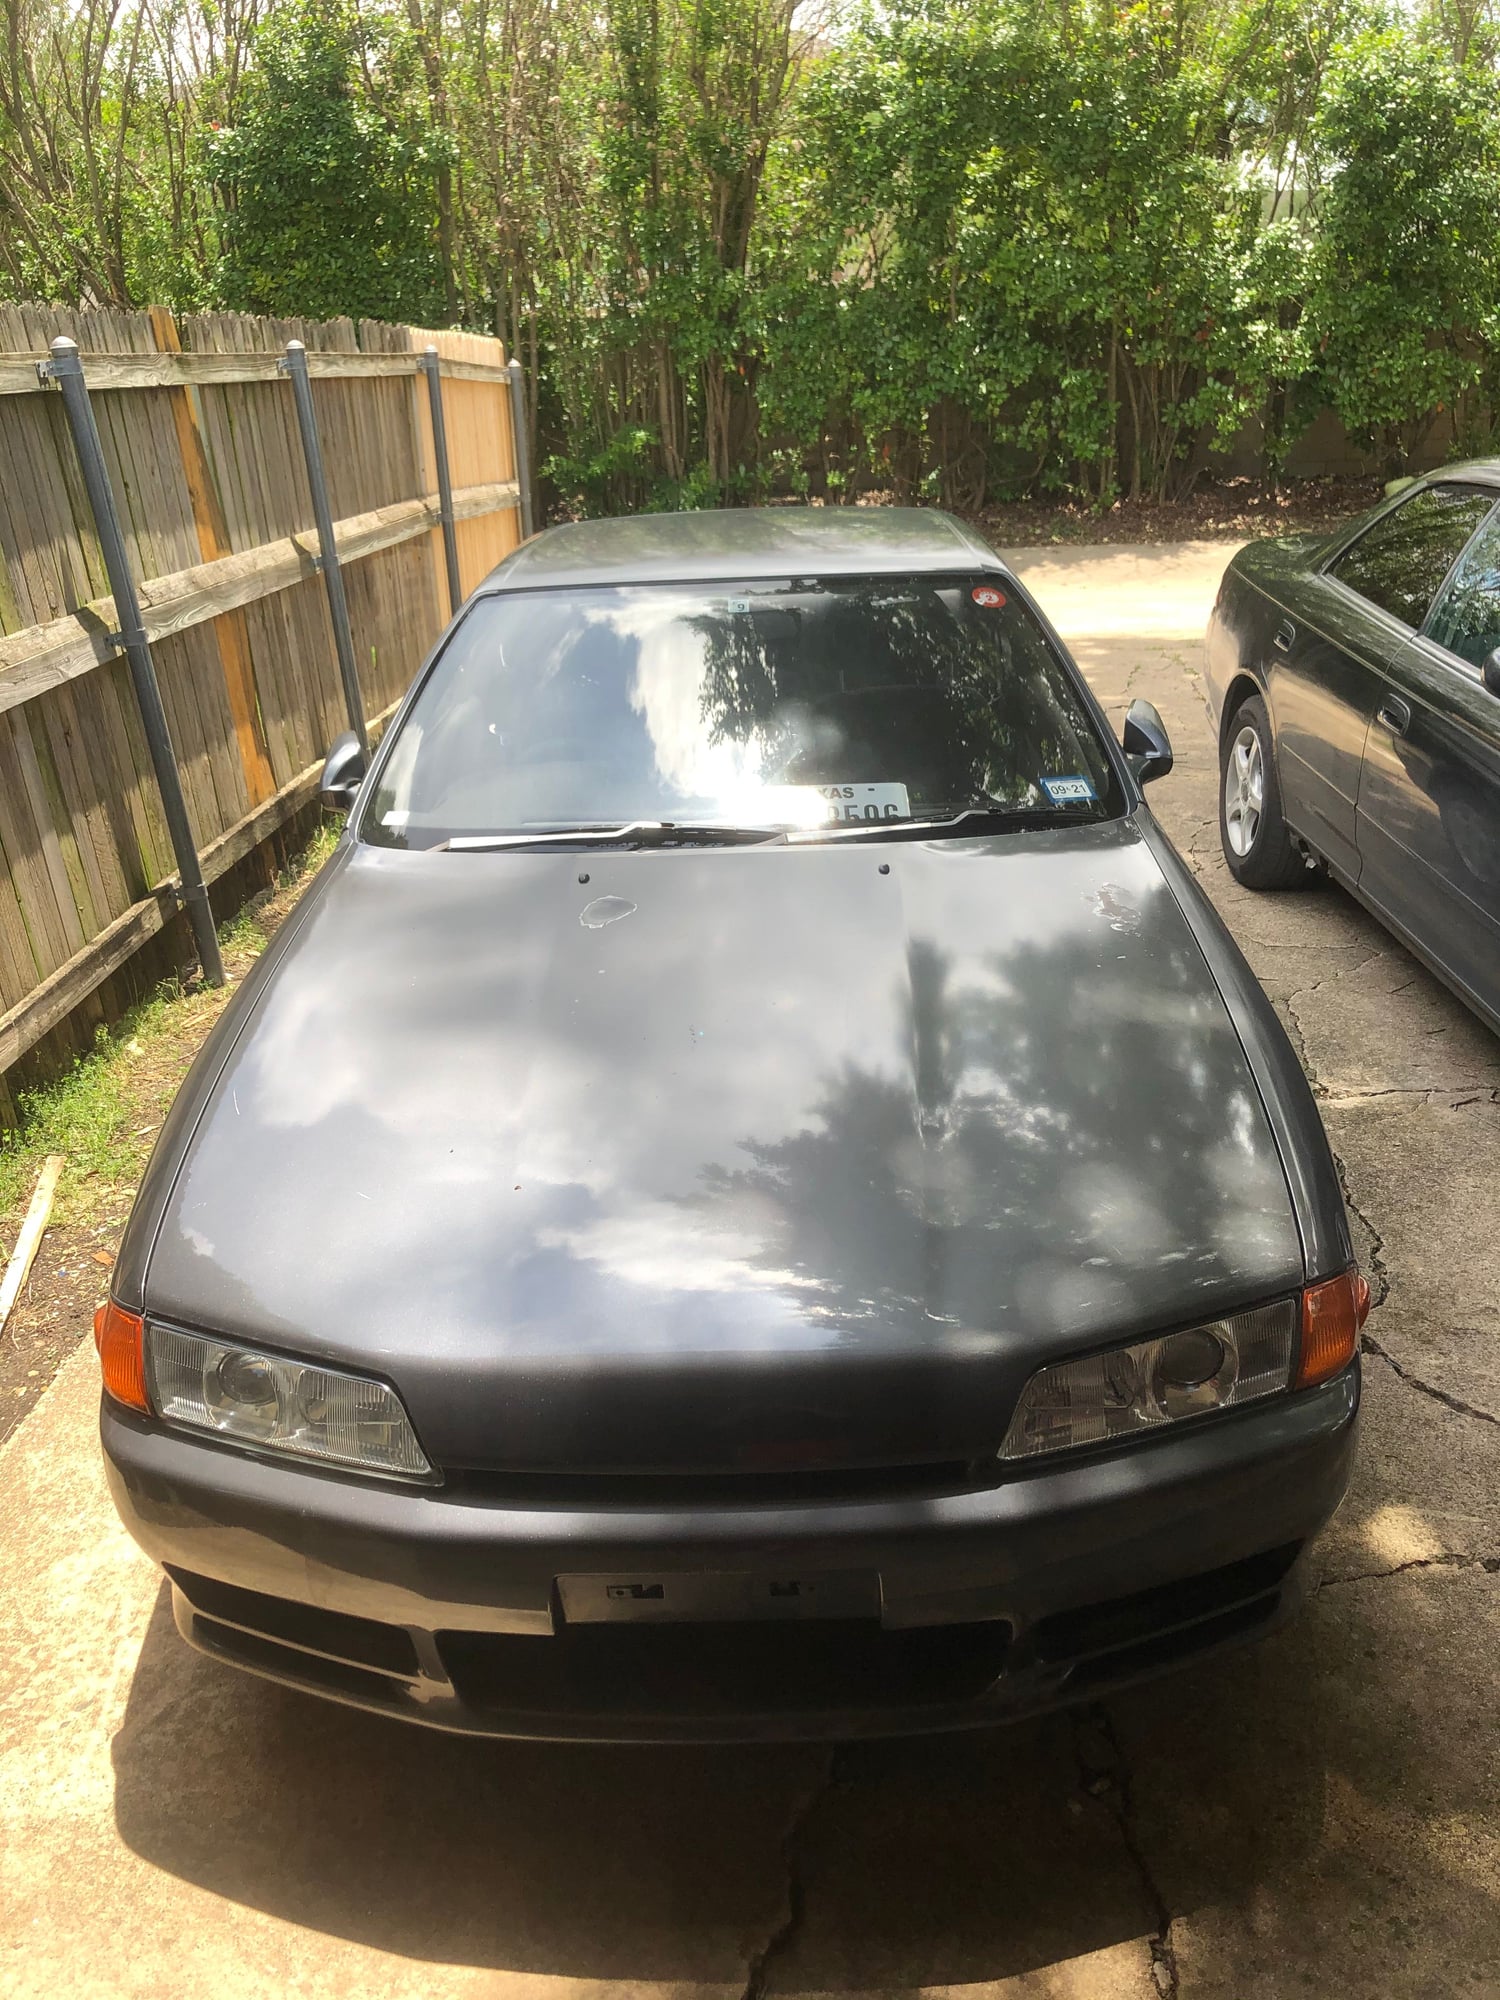 1992 Nissan 240SX - Looking To Trade - Used - VIN 01010101010101010 - 69,000 Miles - 6 cyl - 2WD - Manual - Coupe - Gray - Plano, TX 75075, United States